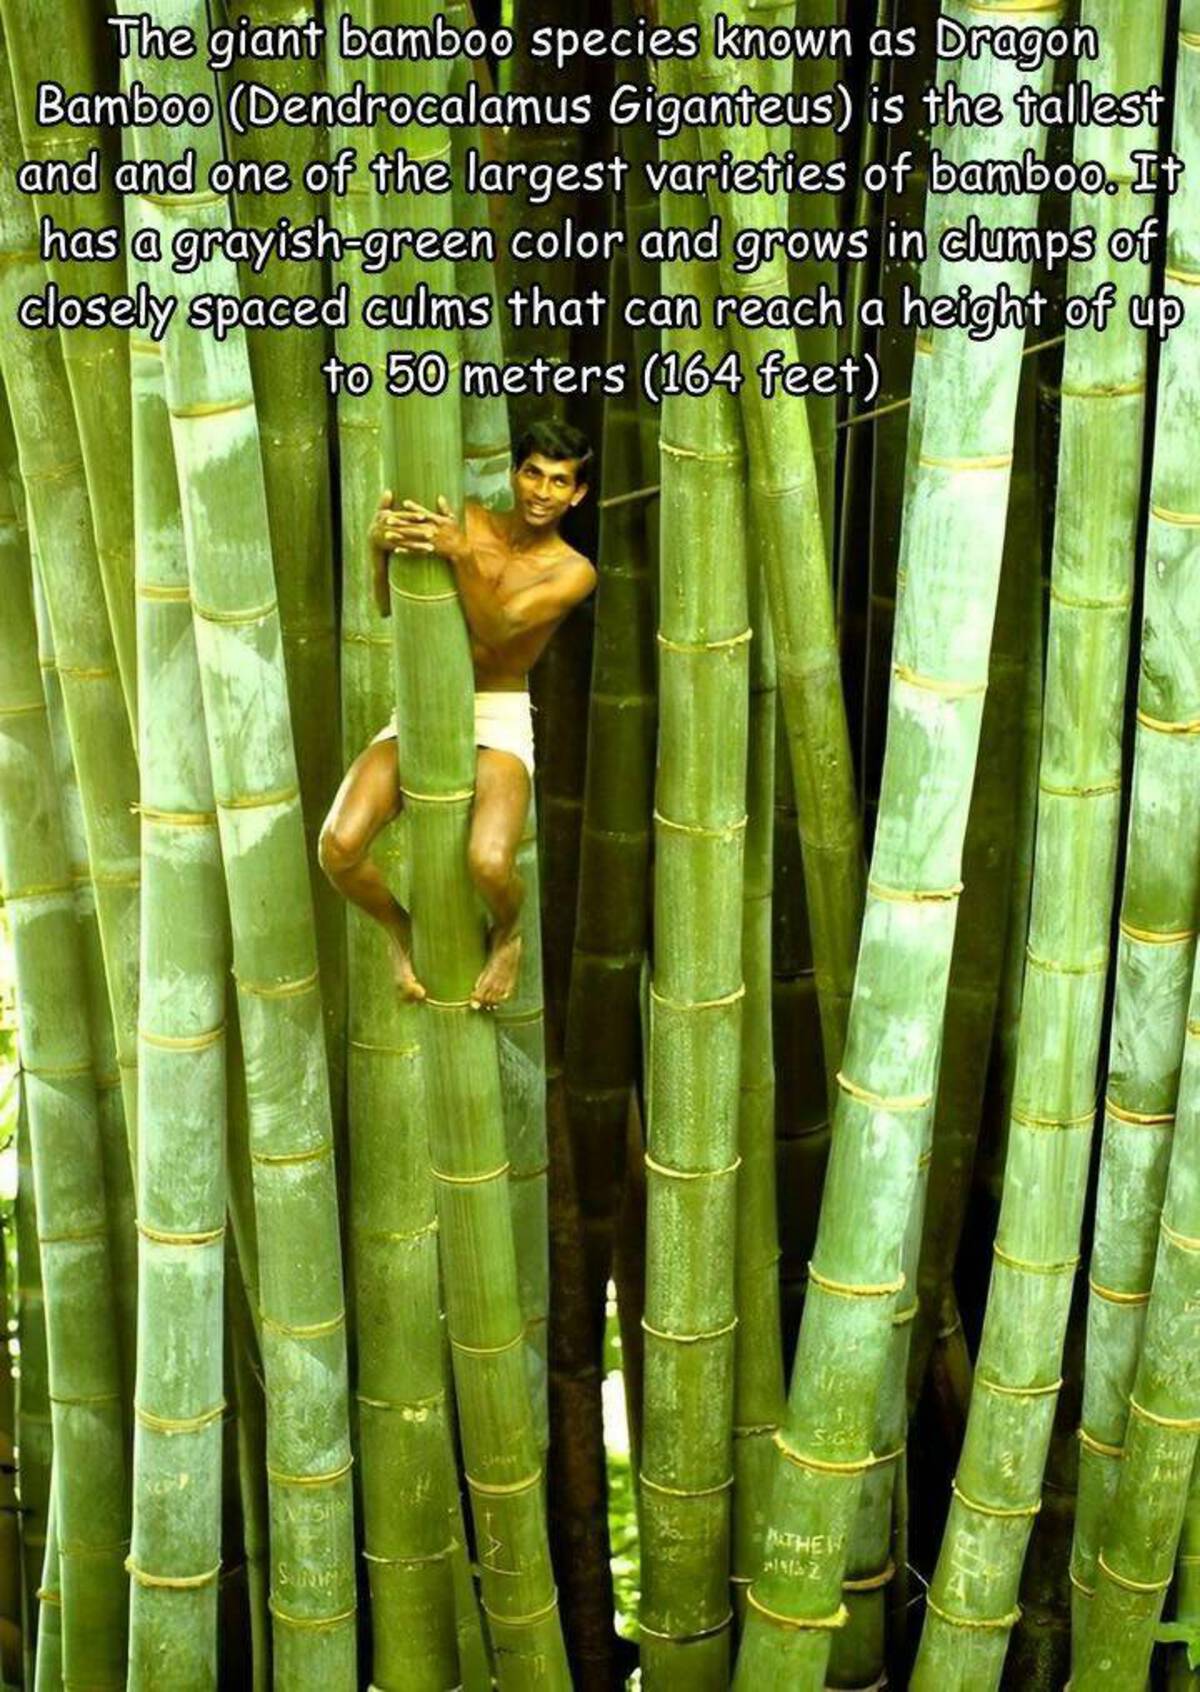 giant bamboo - The giant bamboo species known as Dragon Bamboo Dendrocalamus Giganteus is the tallest and and one of the largest varieties of bamboo. It has a grayishgreen color and grows in clumps of closely spaced culms that can reach a height of up to 